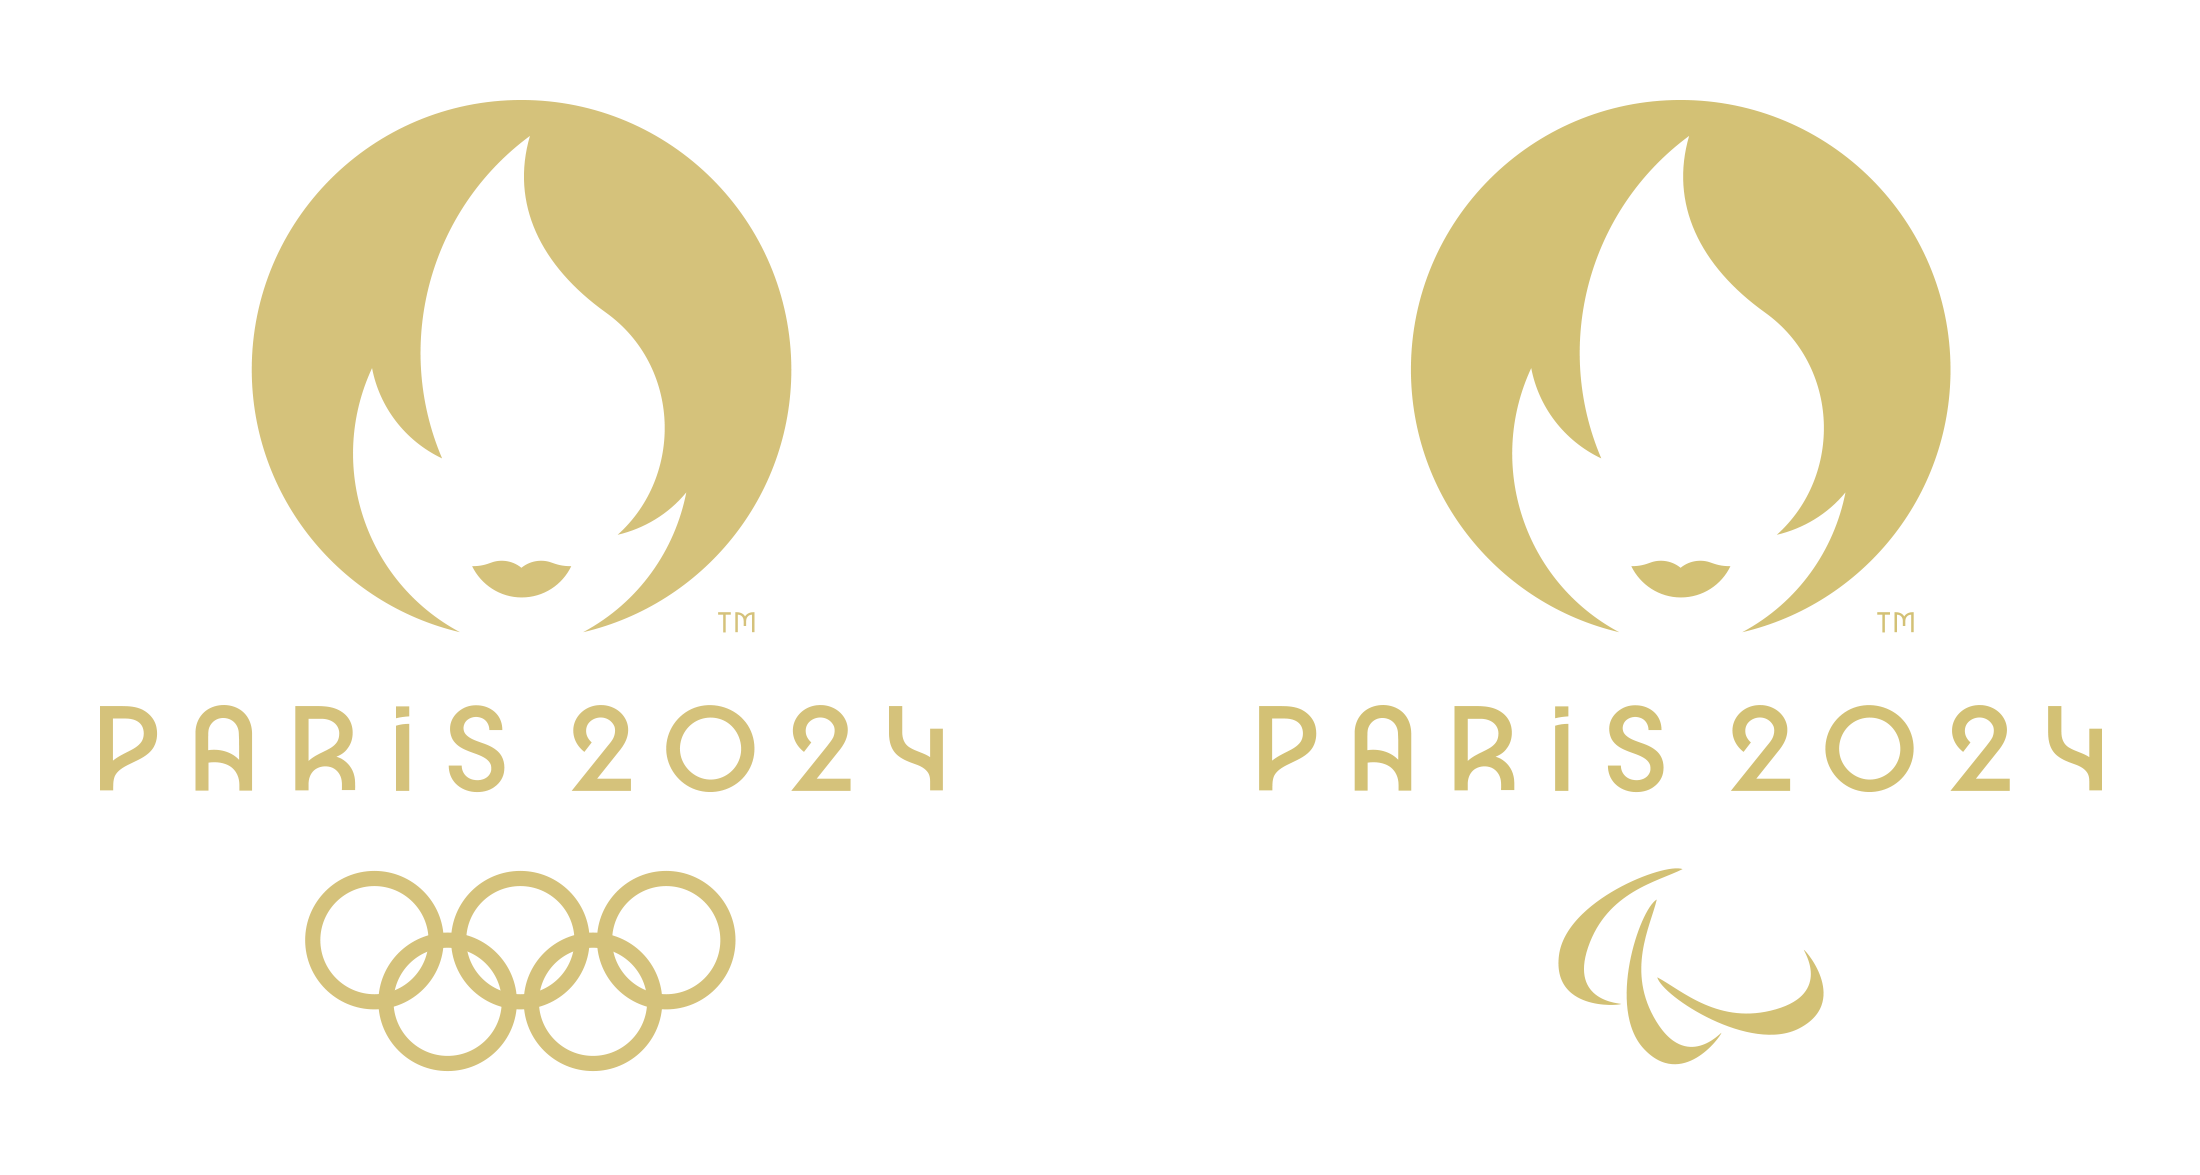 Paris 2024 Olympic and Paralympic games brands